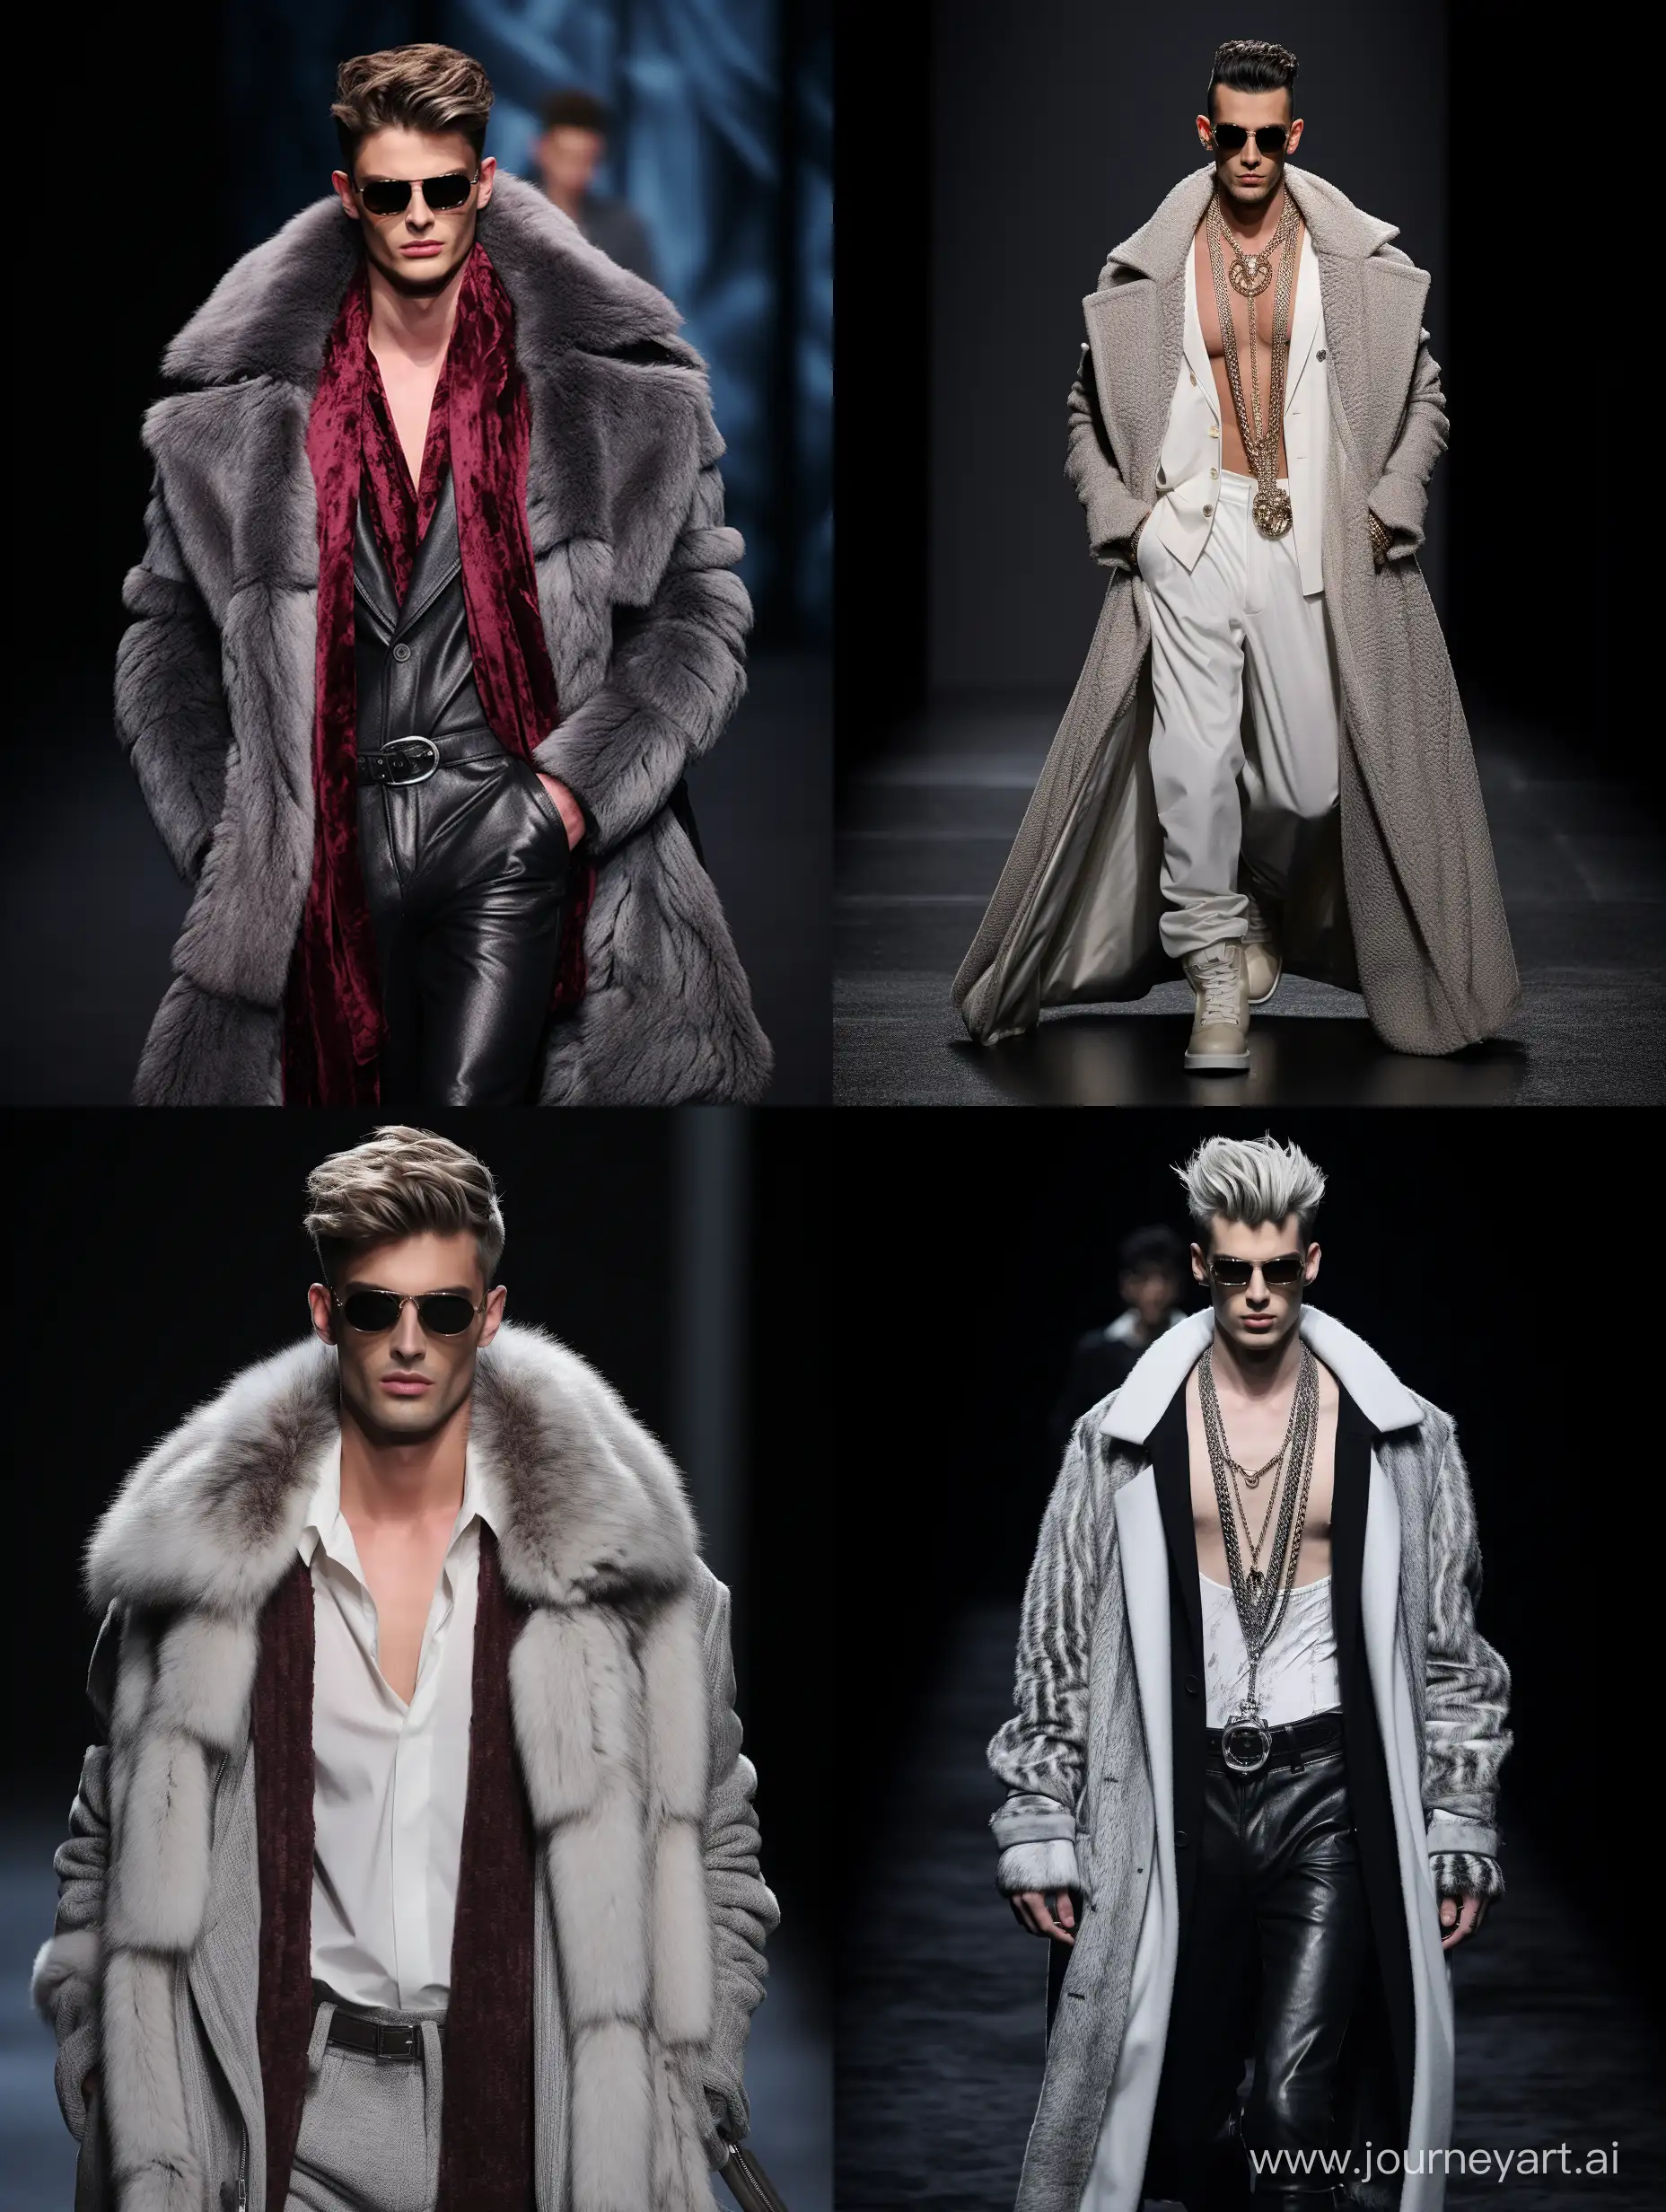 Stylish-Male-Runway-Fashion-Featuring-Slim-Jeans-Coats-Vison-Mink-and-Jewelry